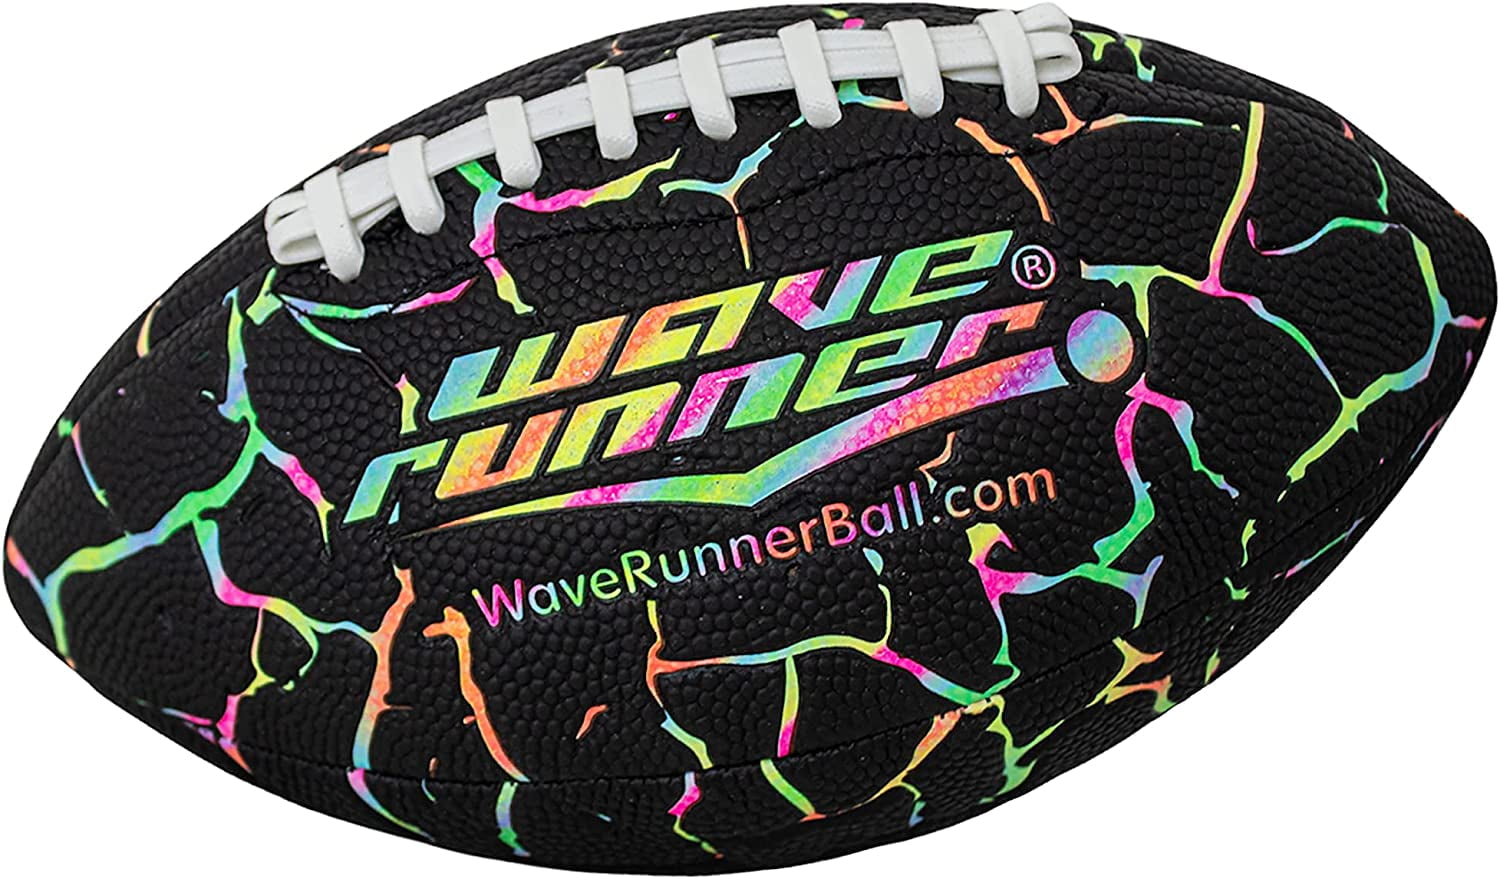 WaveRunner Airglow Grip-It Football- Size 9.25 Inches with Sure-Grip  Technology | Let's Play Football in The Dark!